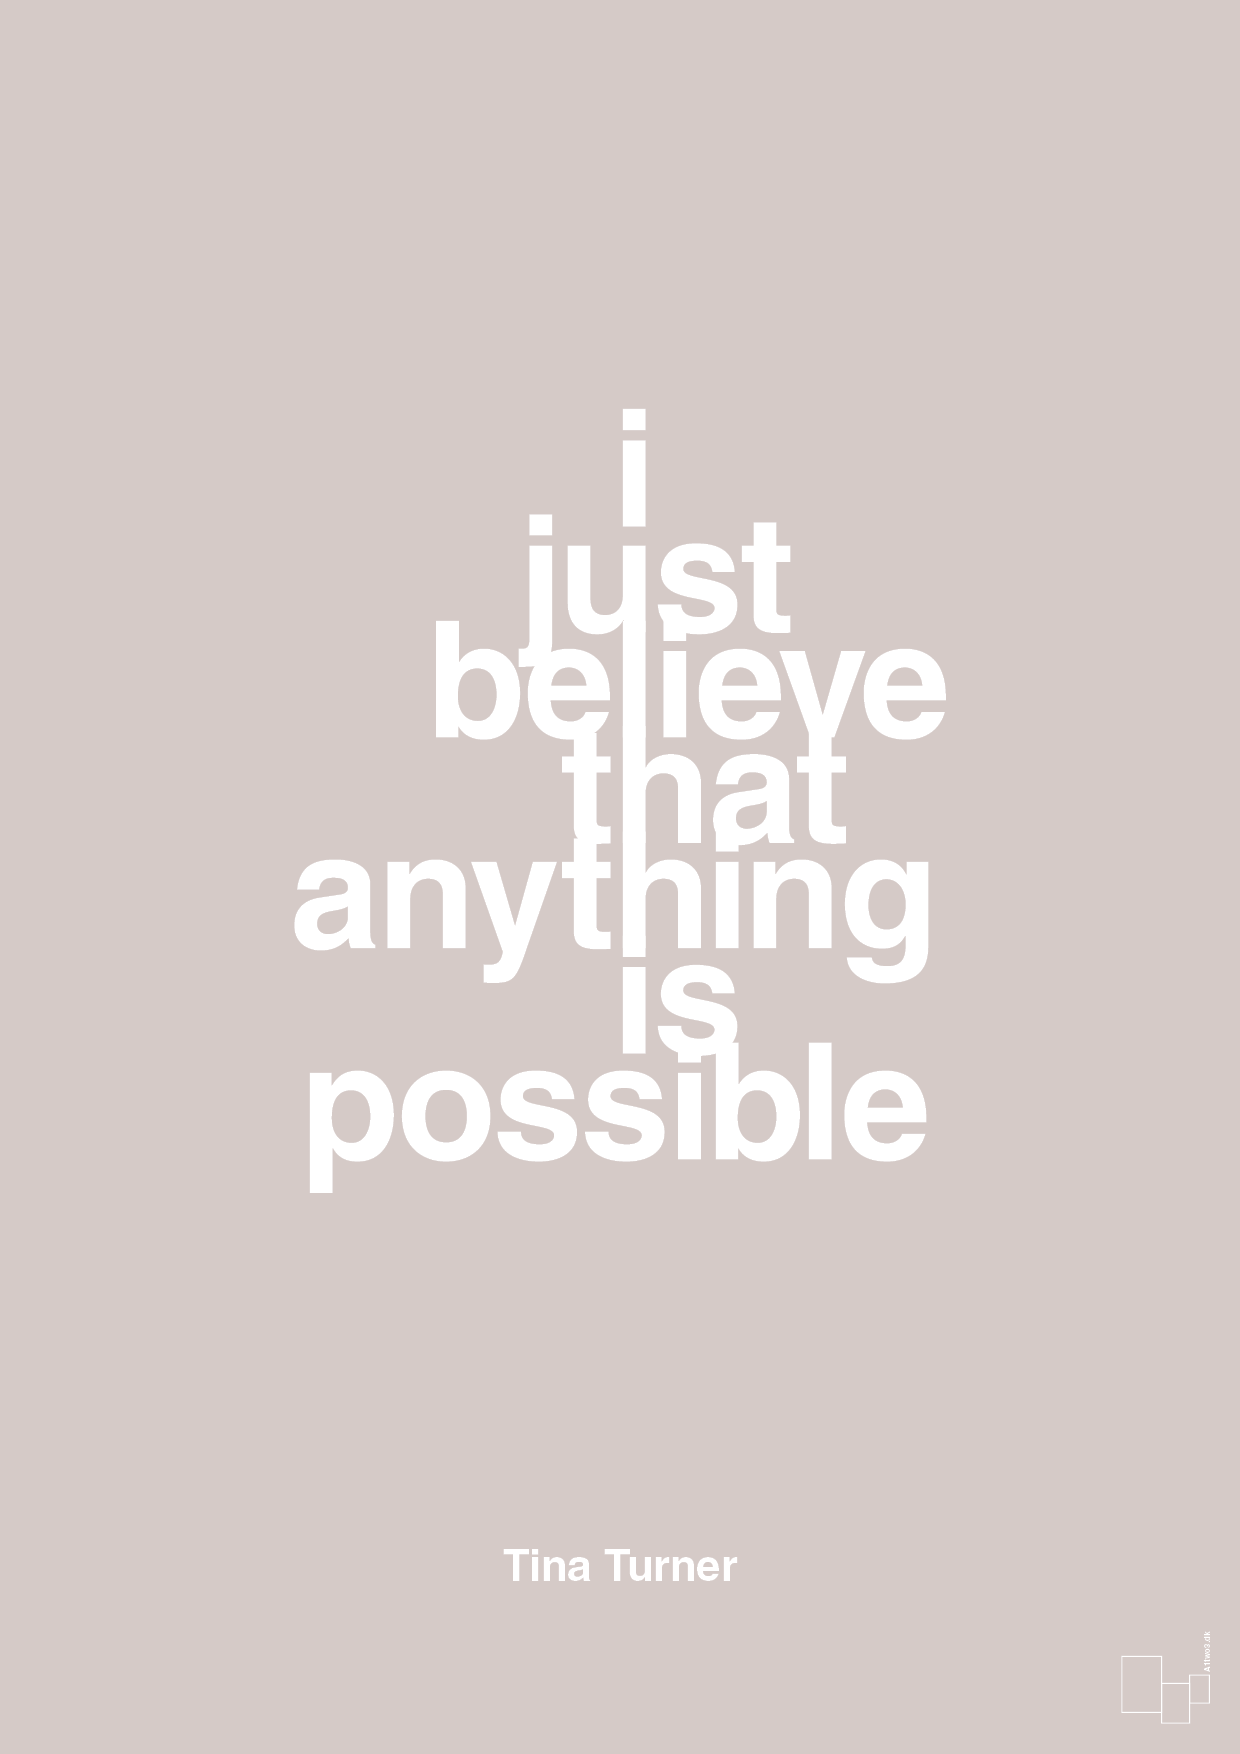 i just believe that anything is possible - Plakat med Citater i Broken Beige